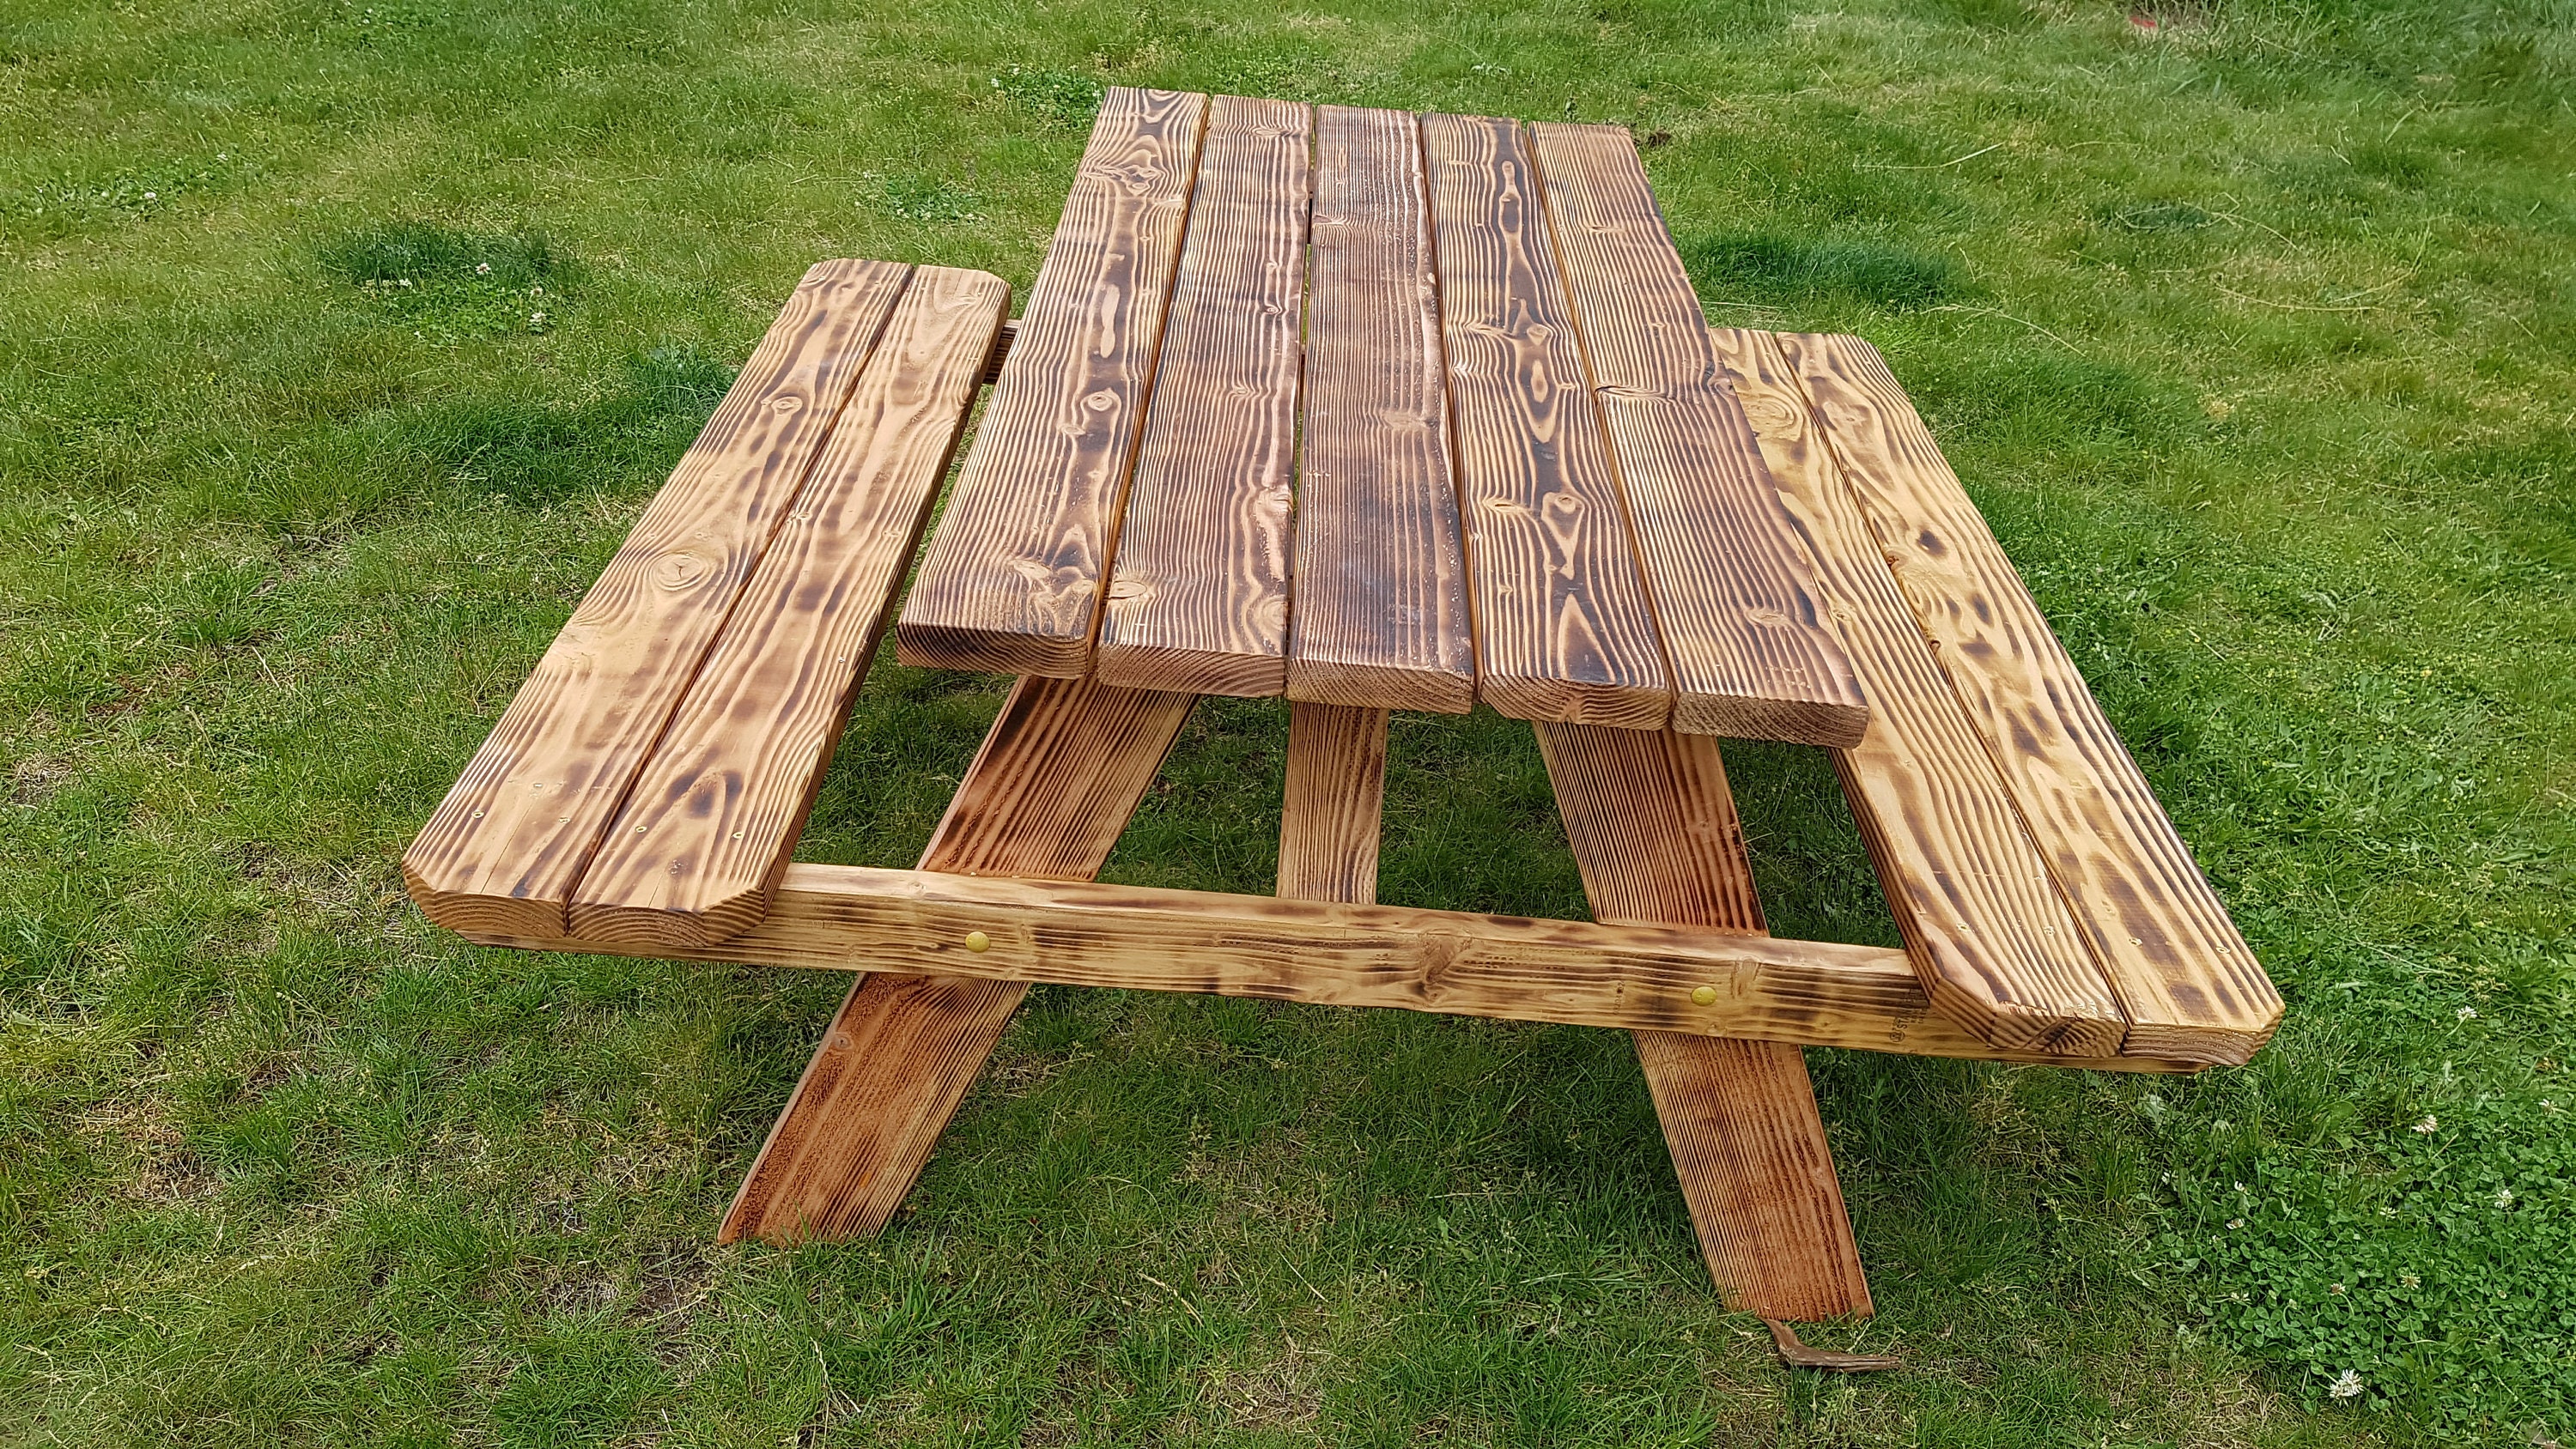 Beautiful 8 Foot Rustic Picnic Table Plans DIY Step by Step | Etsy Canada